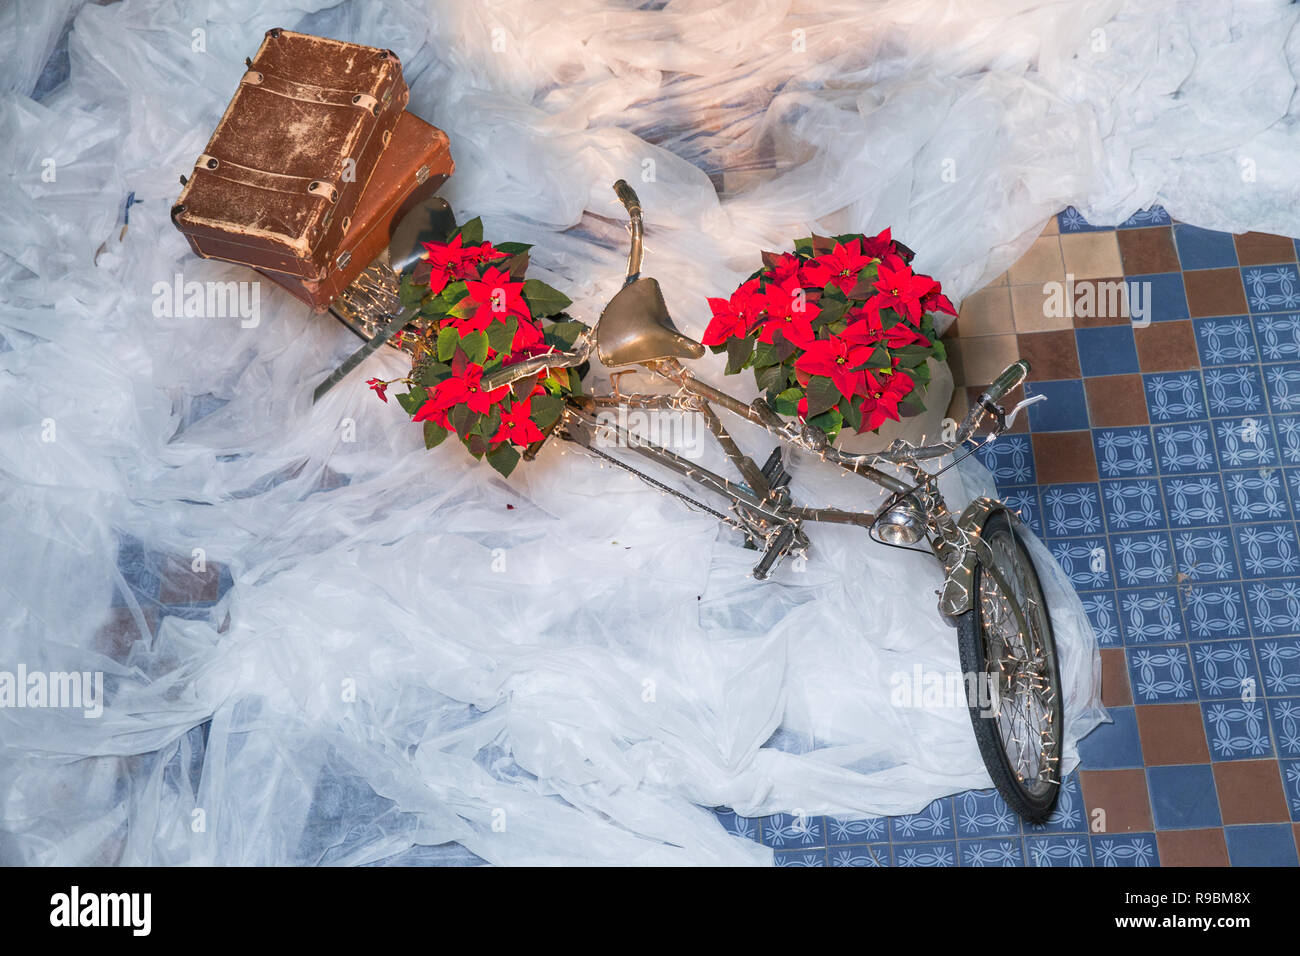 City Cesis, Latvia. Old retro tandem bicycle and christmas decors, red flowers. Travel photo 2018. december. Stock Photo